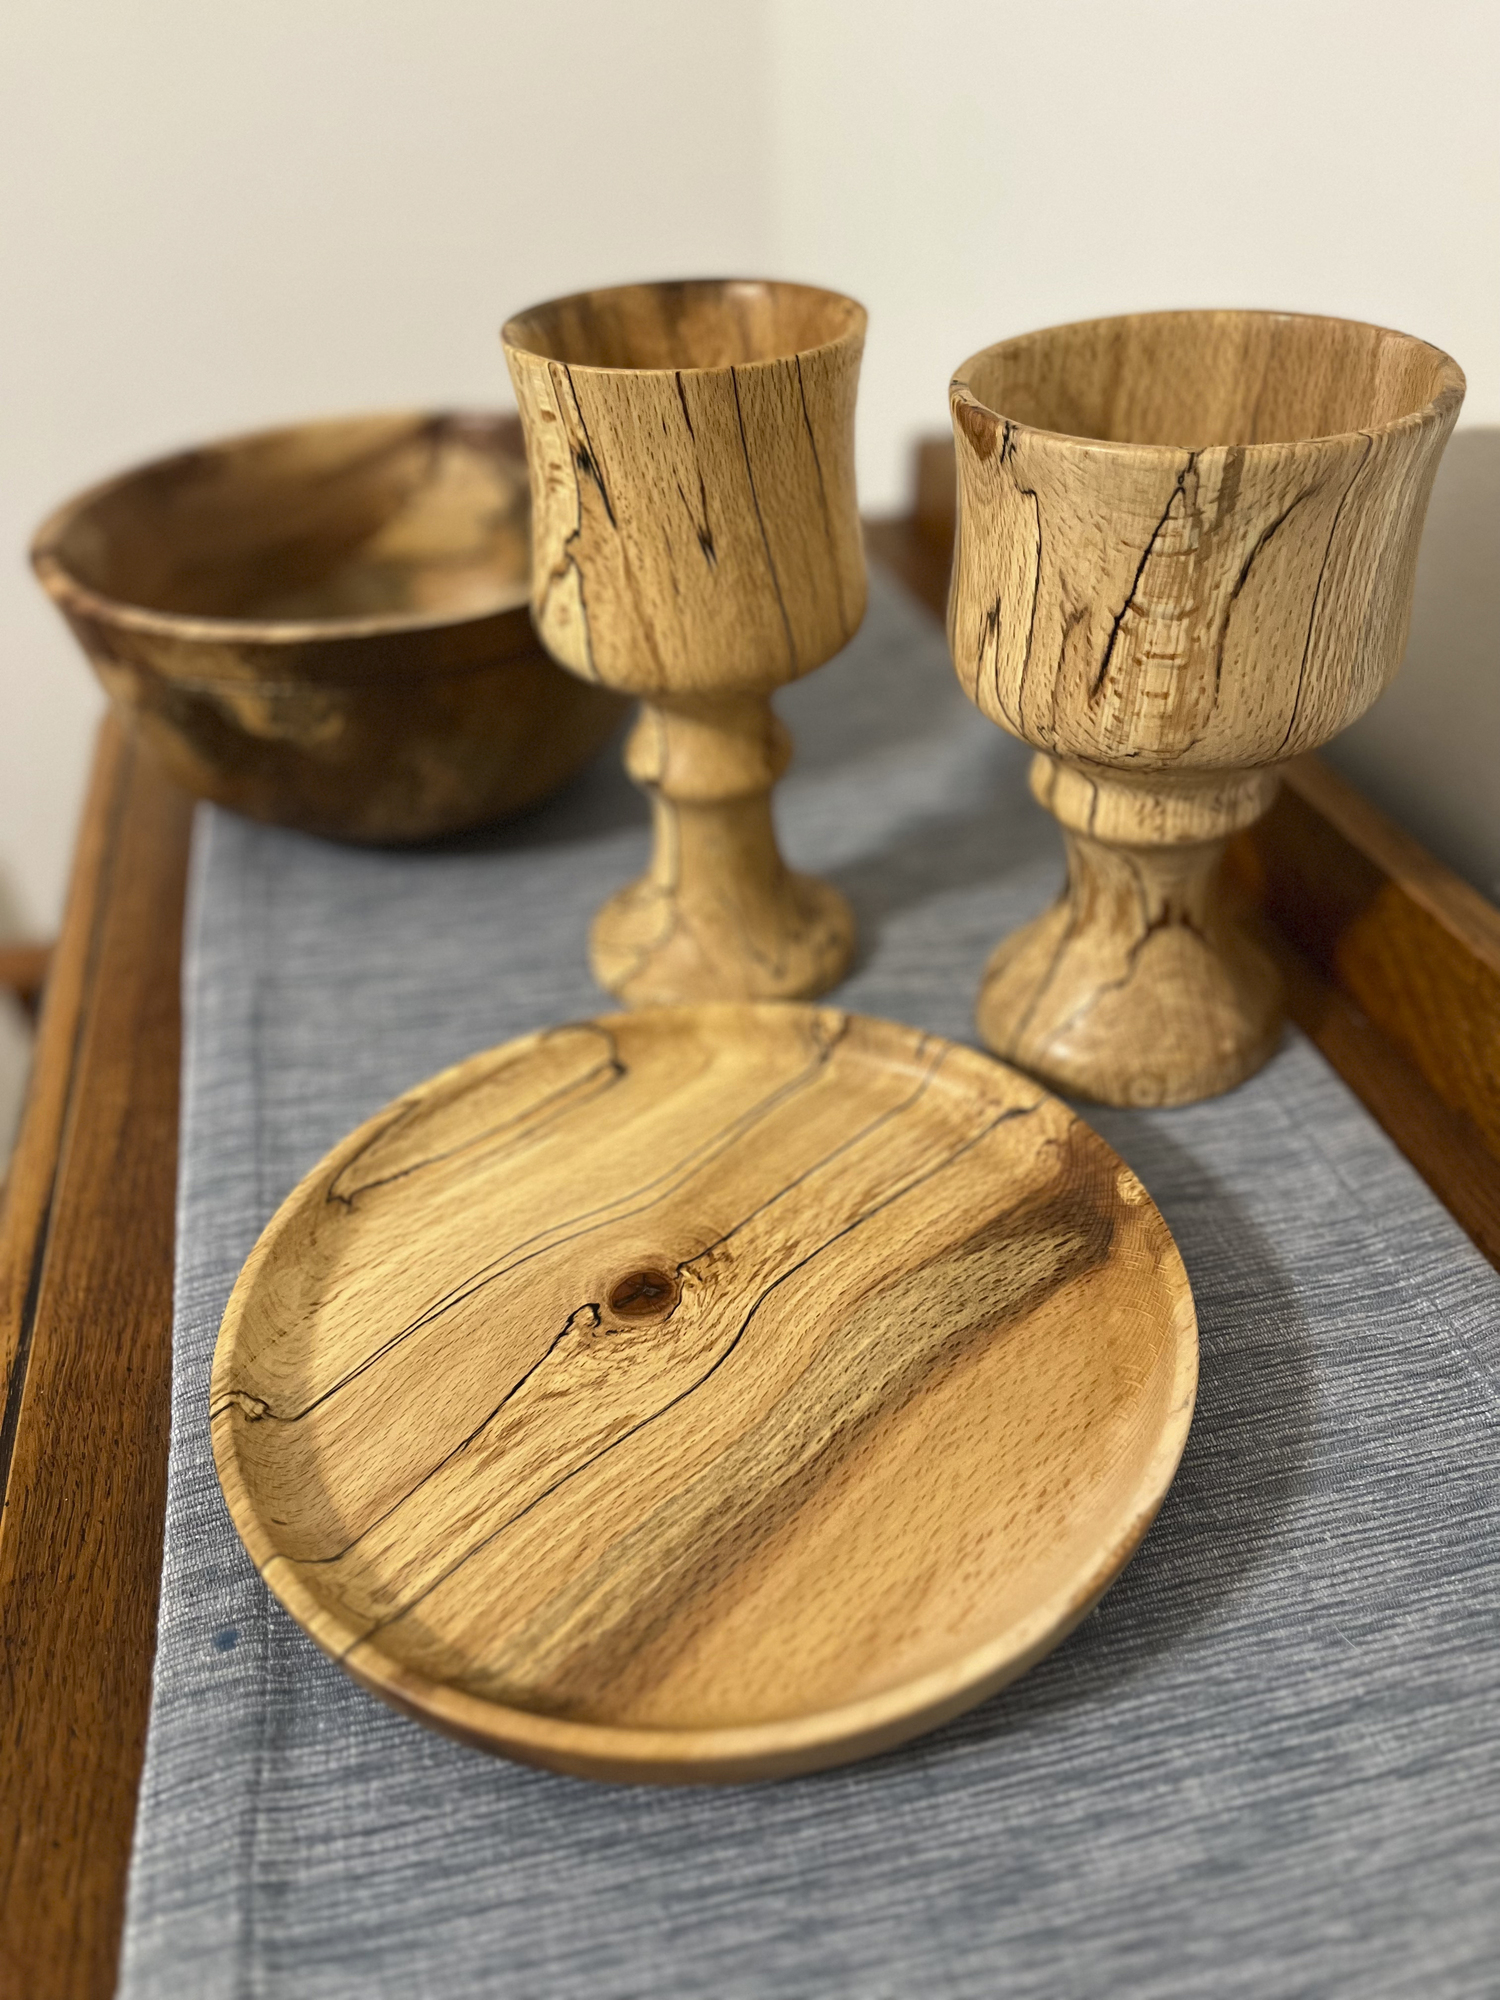 The Communion set that John Halsey made as a gift for the Reverend Joanne Utley, the pastor of The Hamptons United Methodist Church. COURTESY REVEREND JOANNE UTLEY